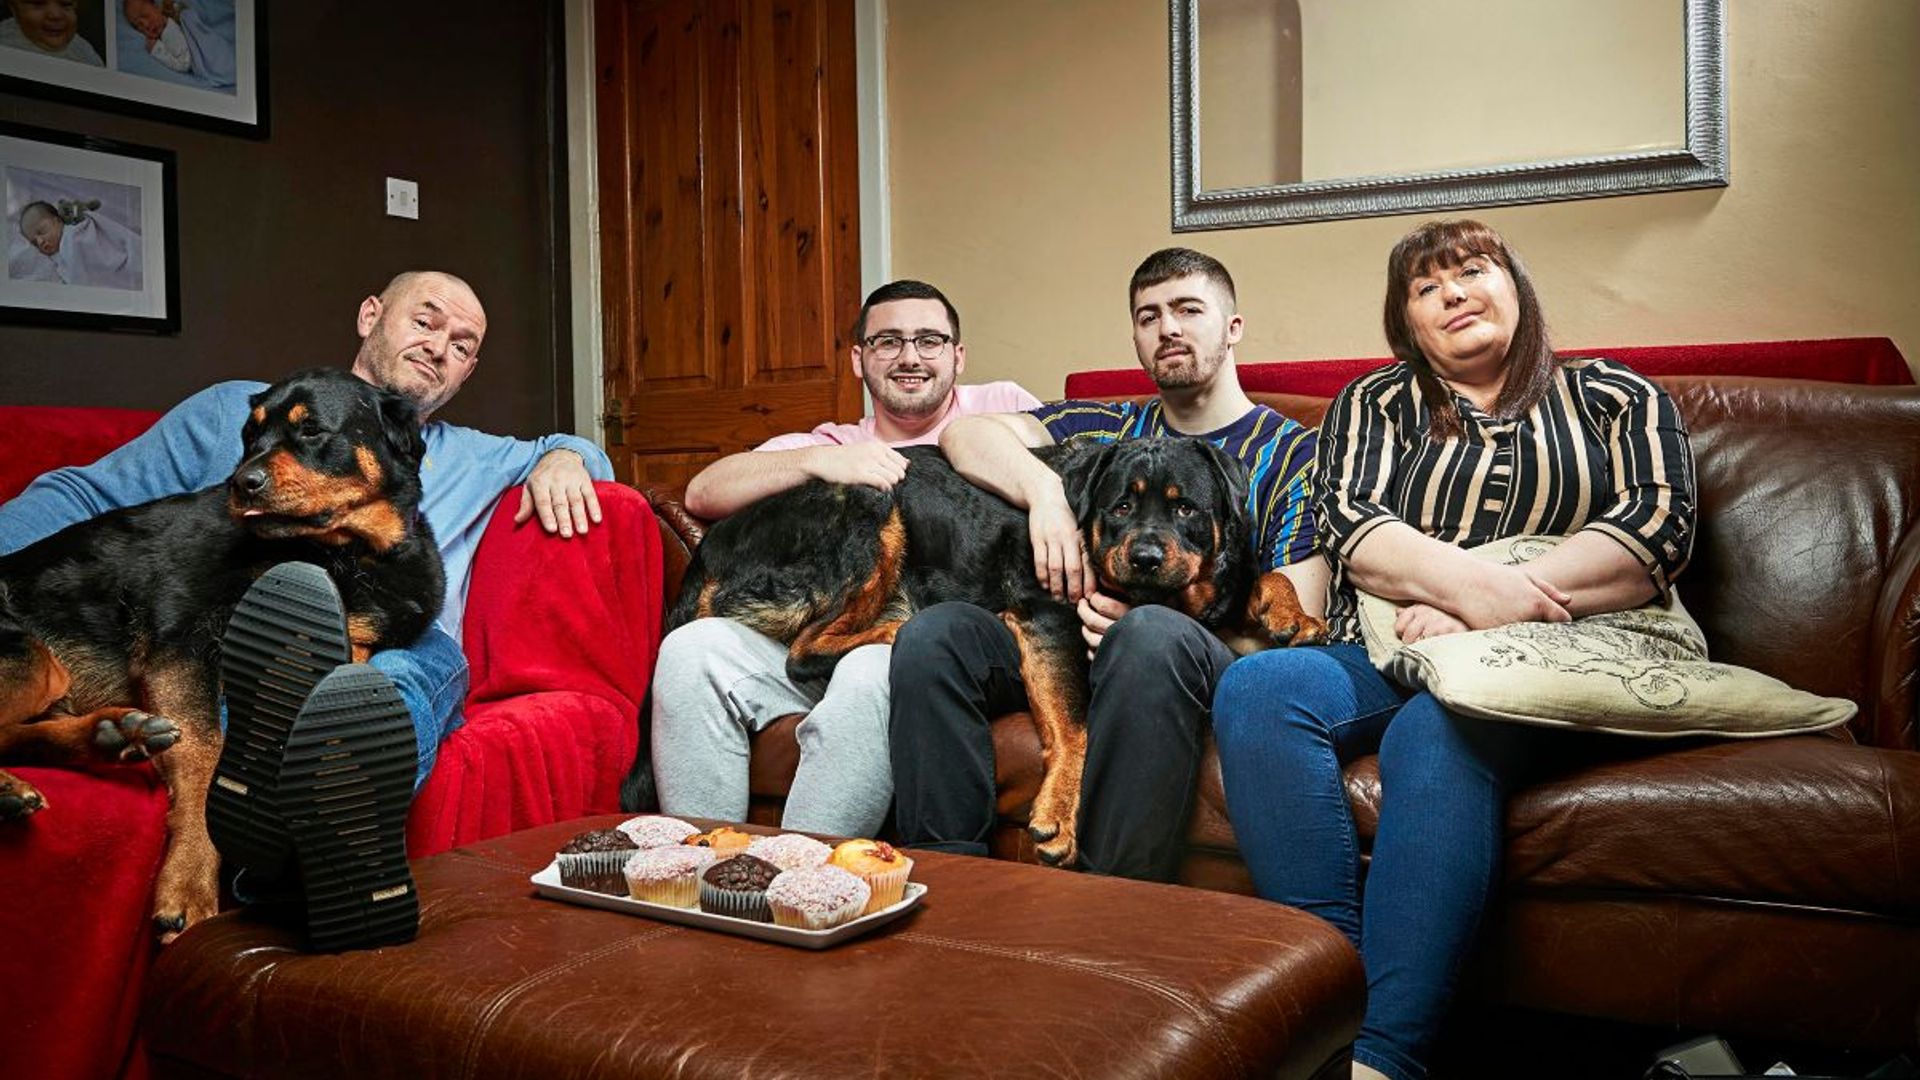 Gogglebox stars finally respond to social distancing complaints 